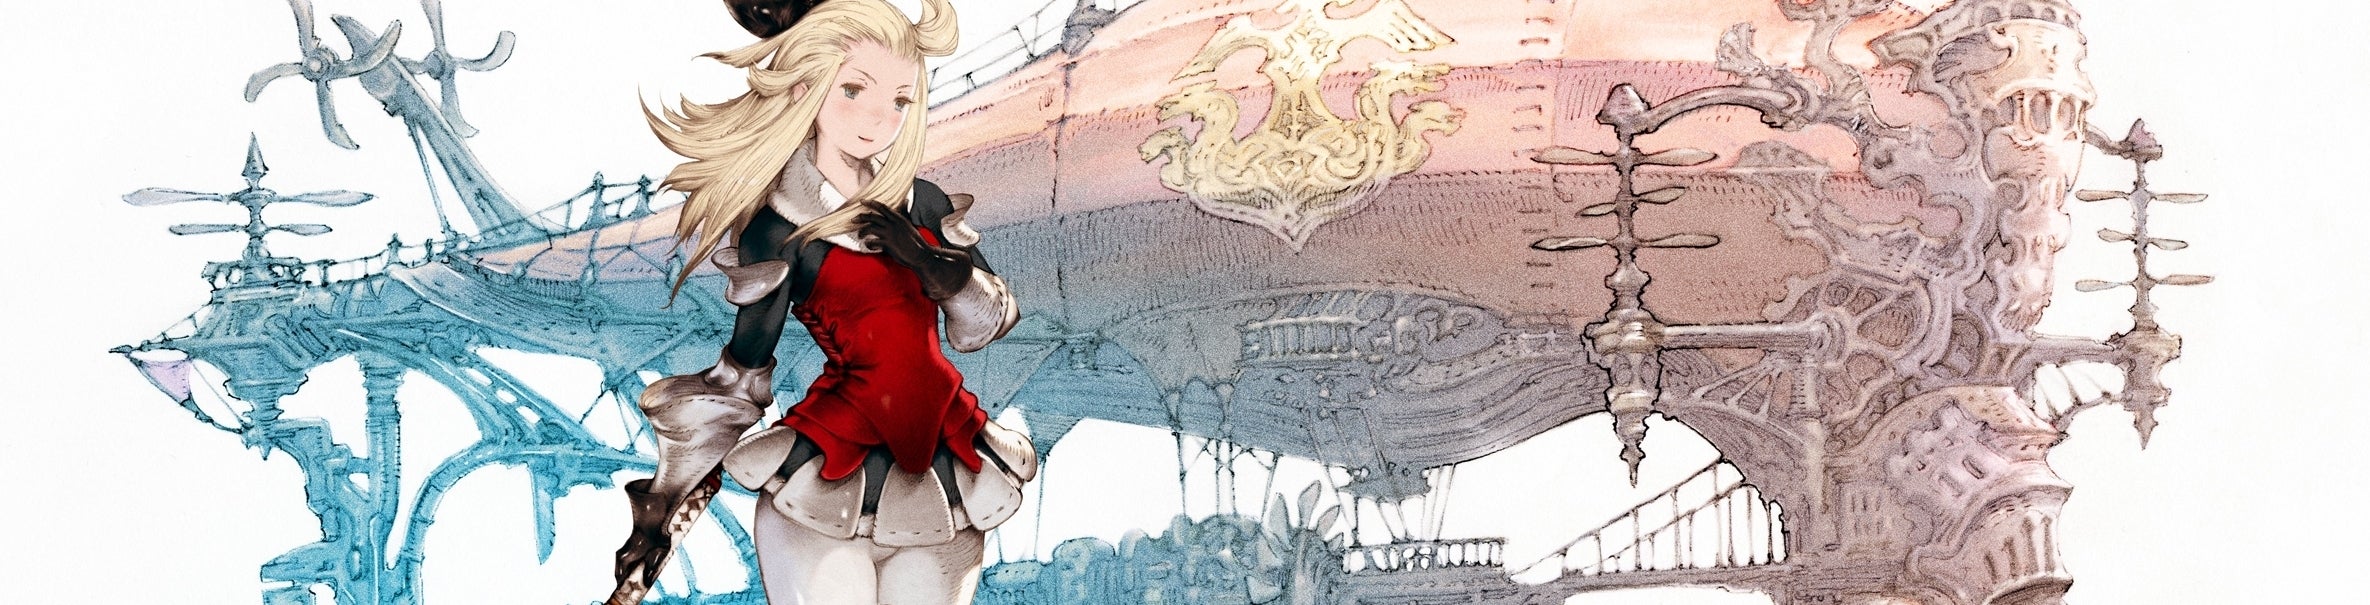 Image for Bravely Default review